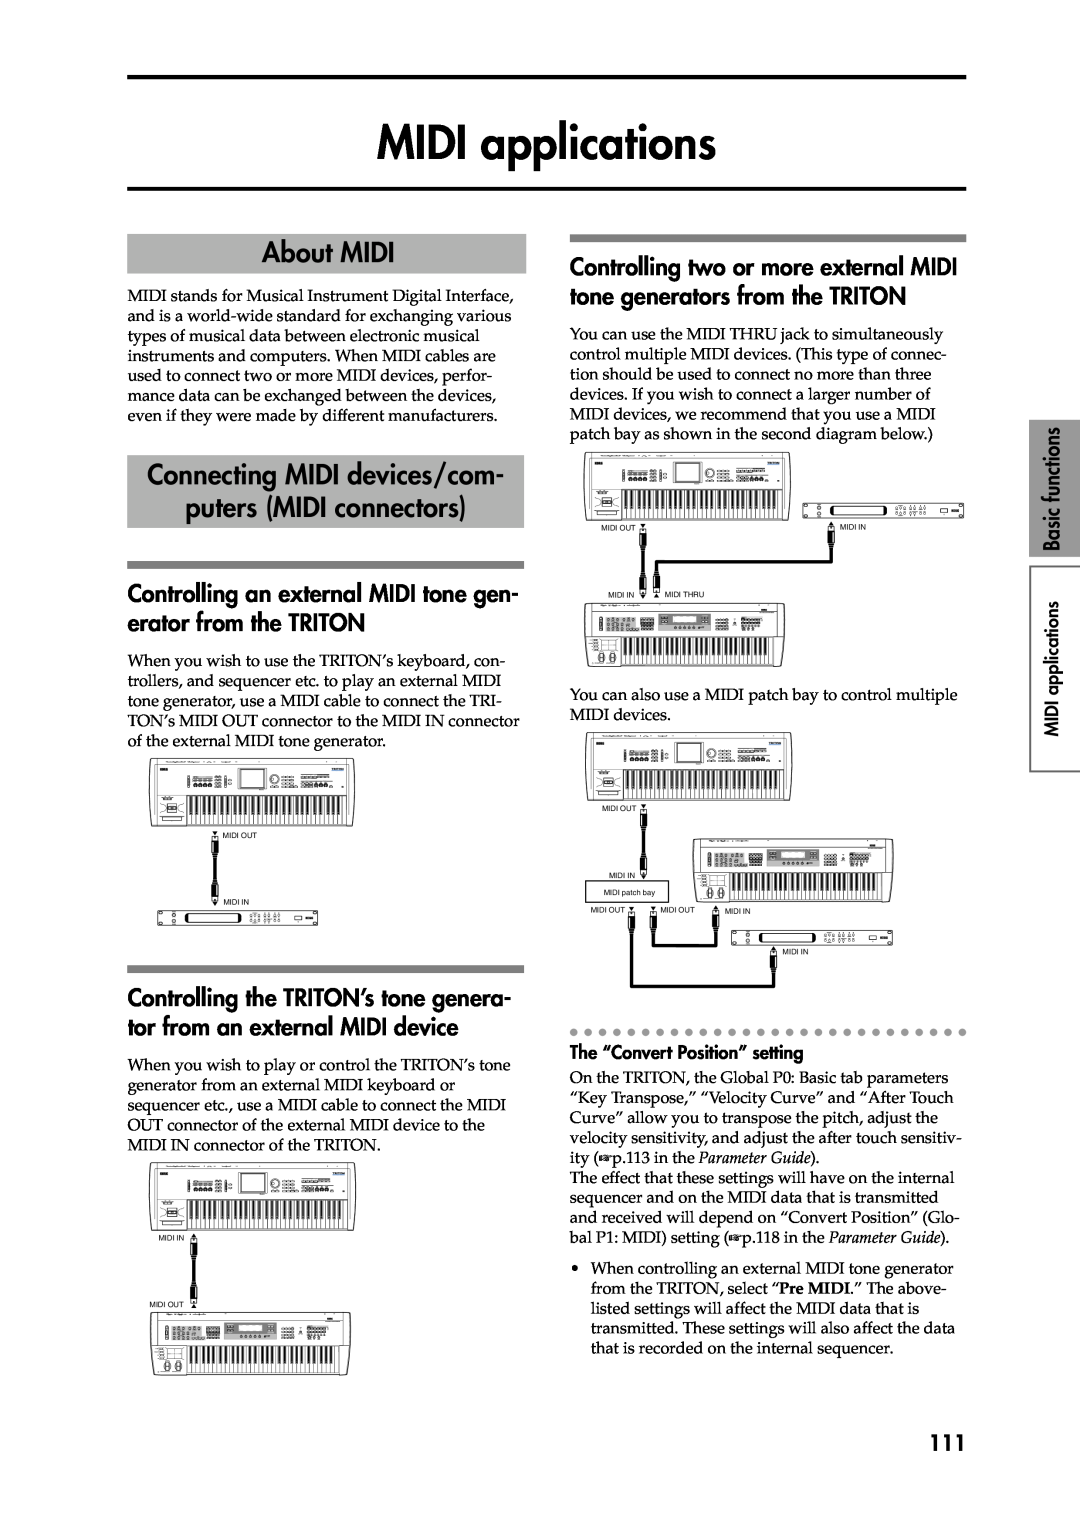 Korg Speaker System owner manual MIDI applications, About MIDI, Connecting MIDI devices/com, puters MIDI connectors 